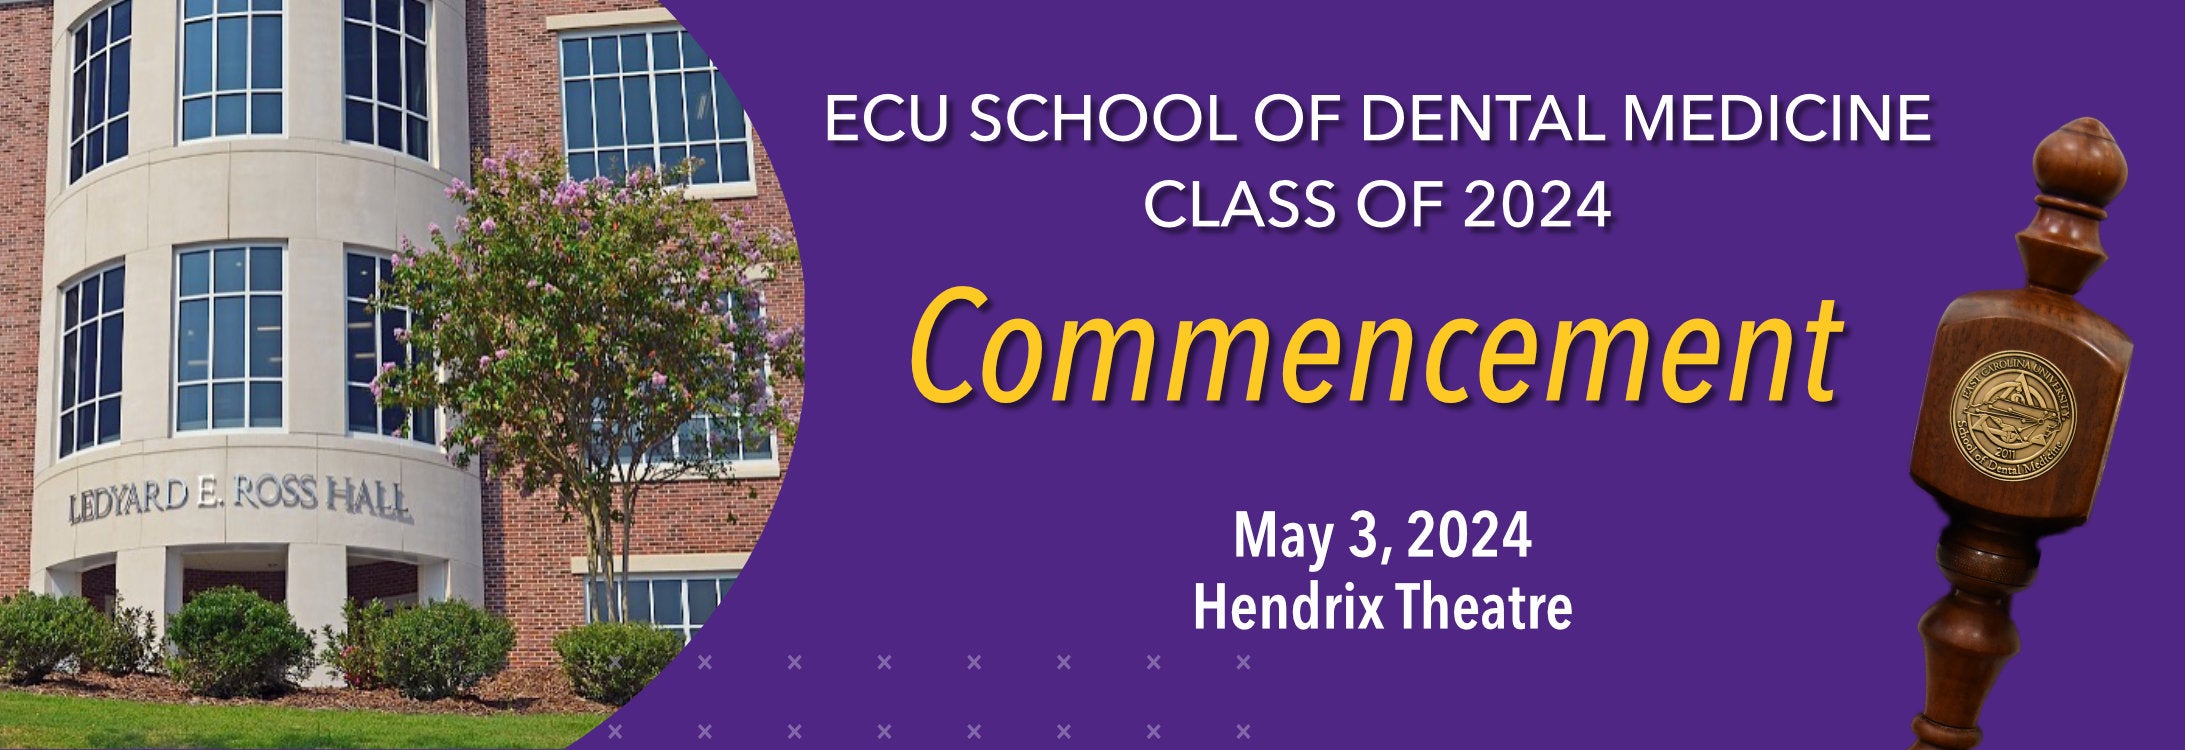 Dental Medicine Commencement on May 3, 2024 at Hendrix Theatre